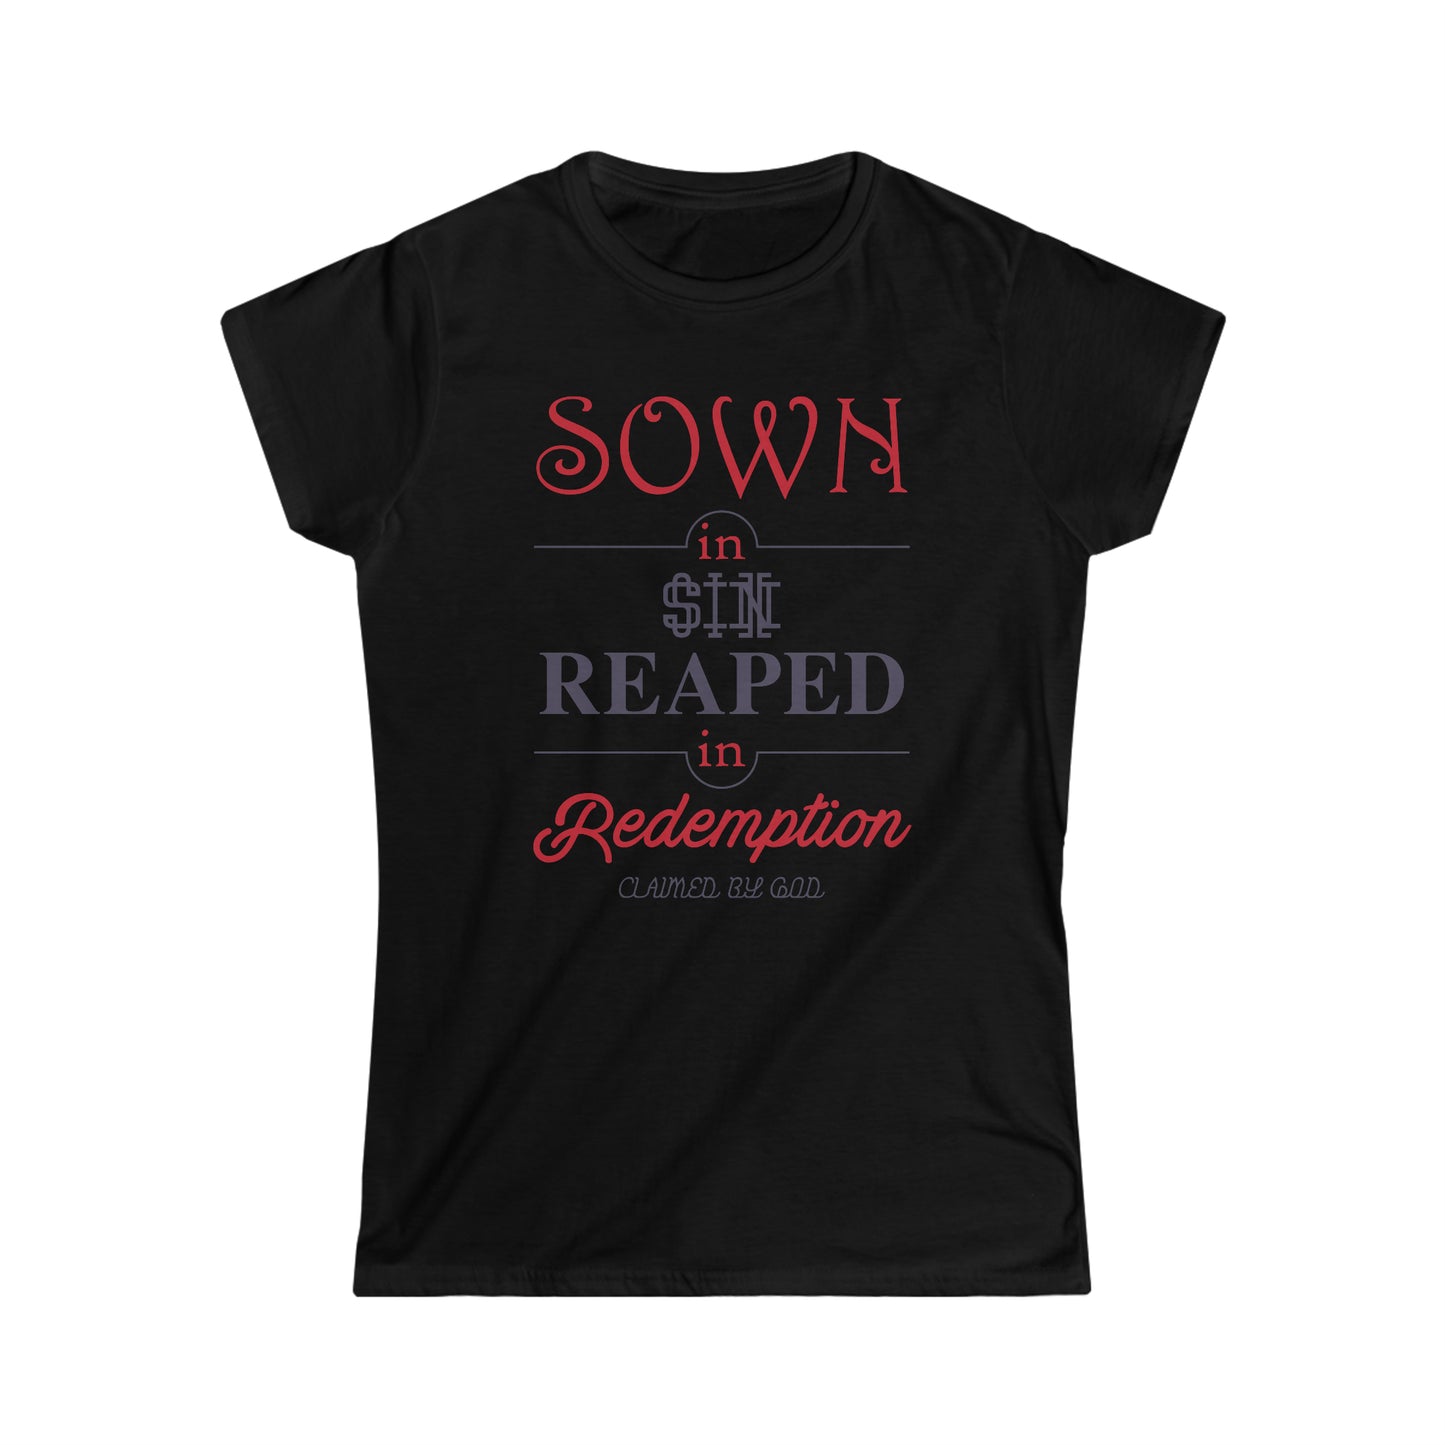 Sown in sin reaped in redemption Women's T-shirt